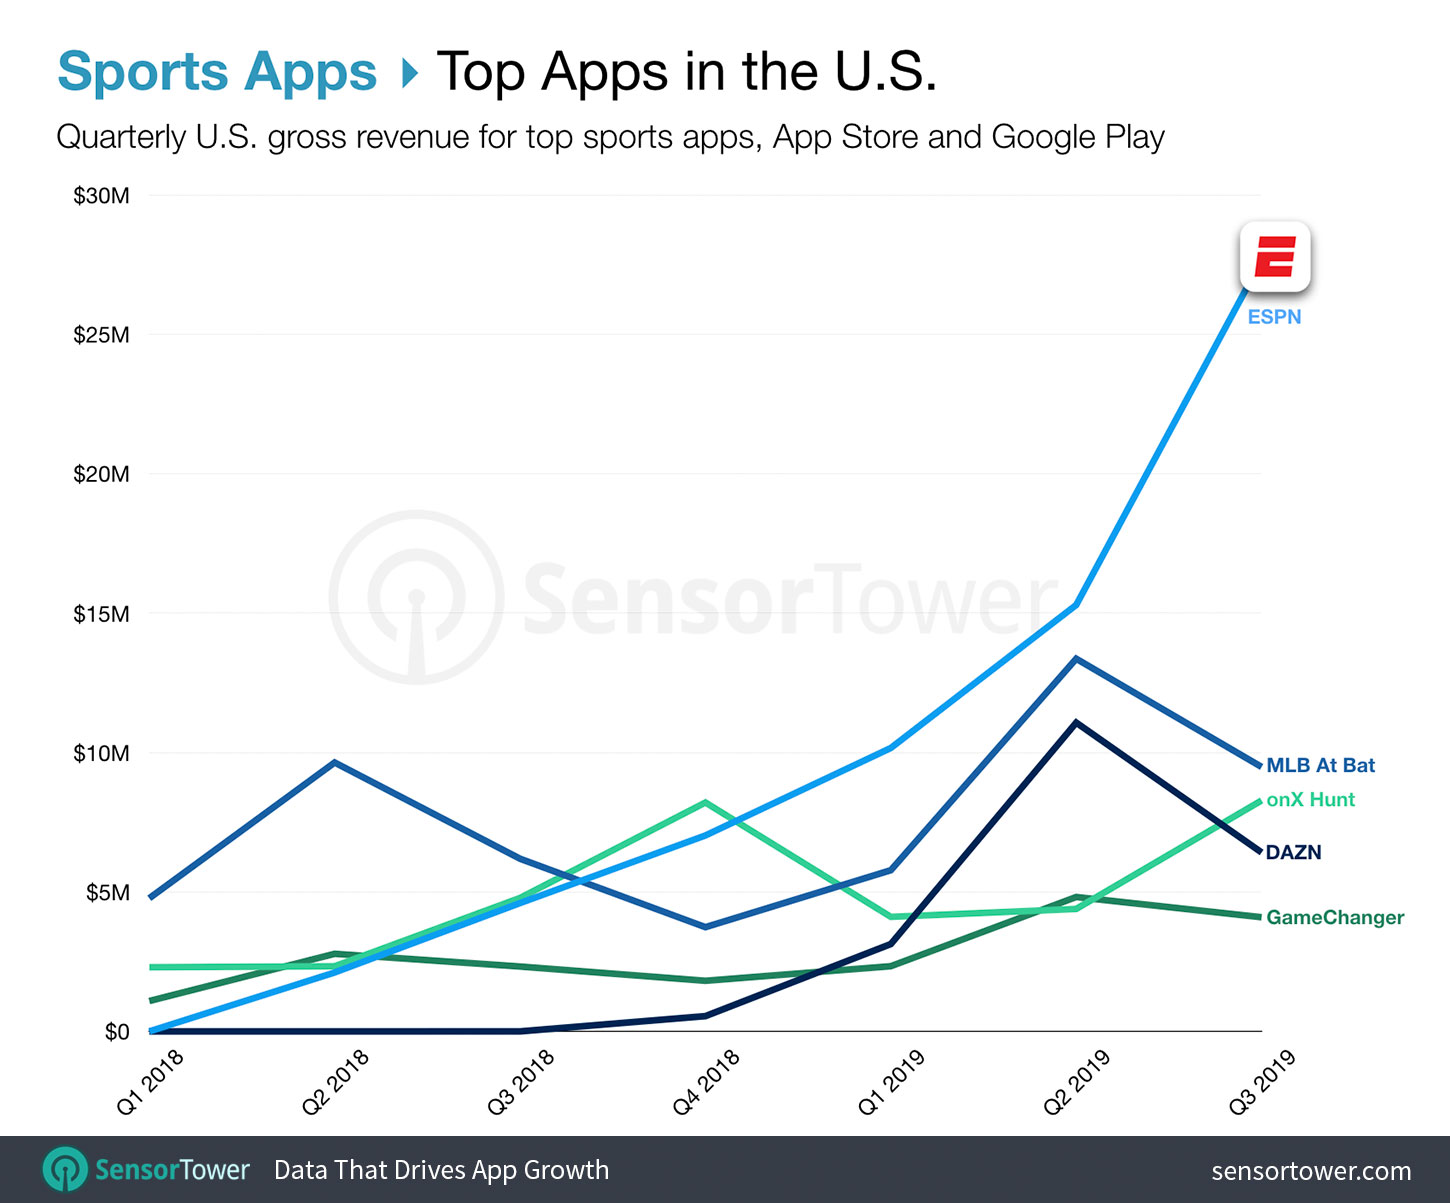 Top Sports Apps in the U.S. by Revenue for Q3 2019